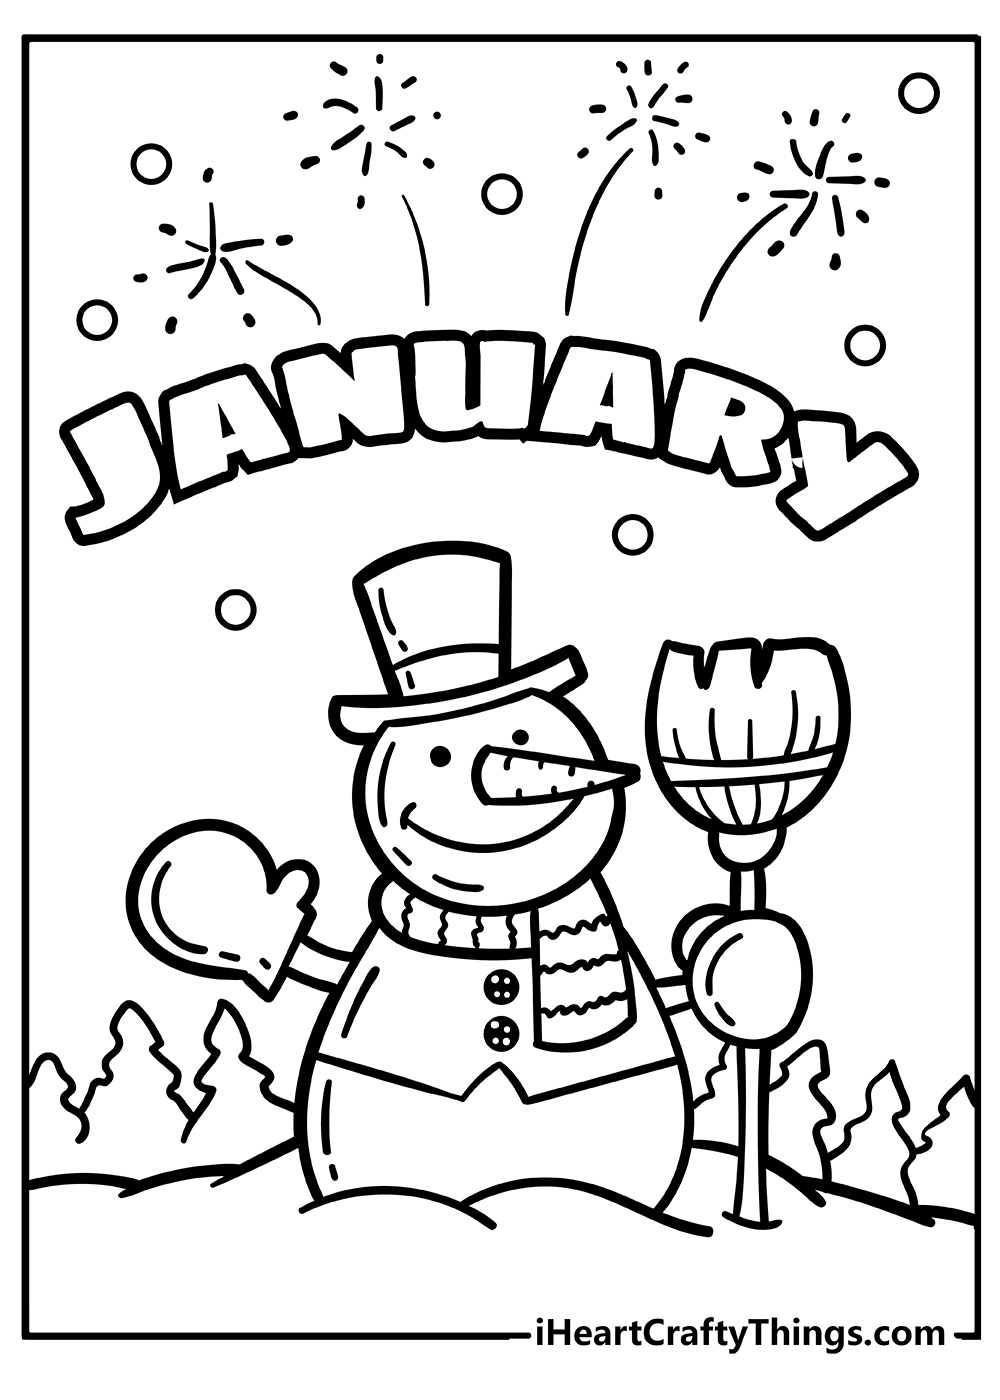 January Easy Coloring Pages